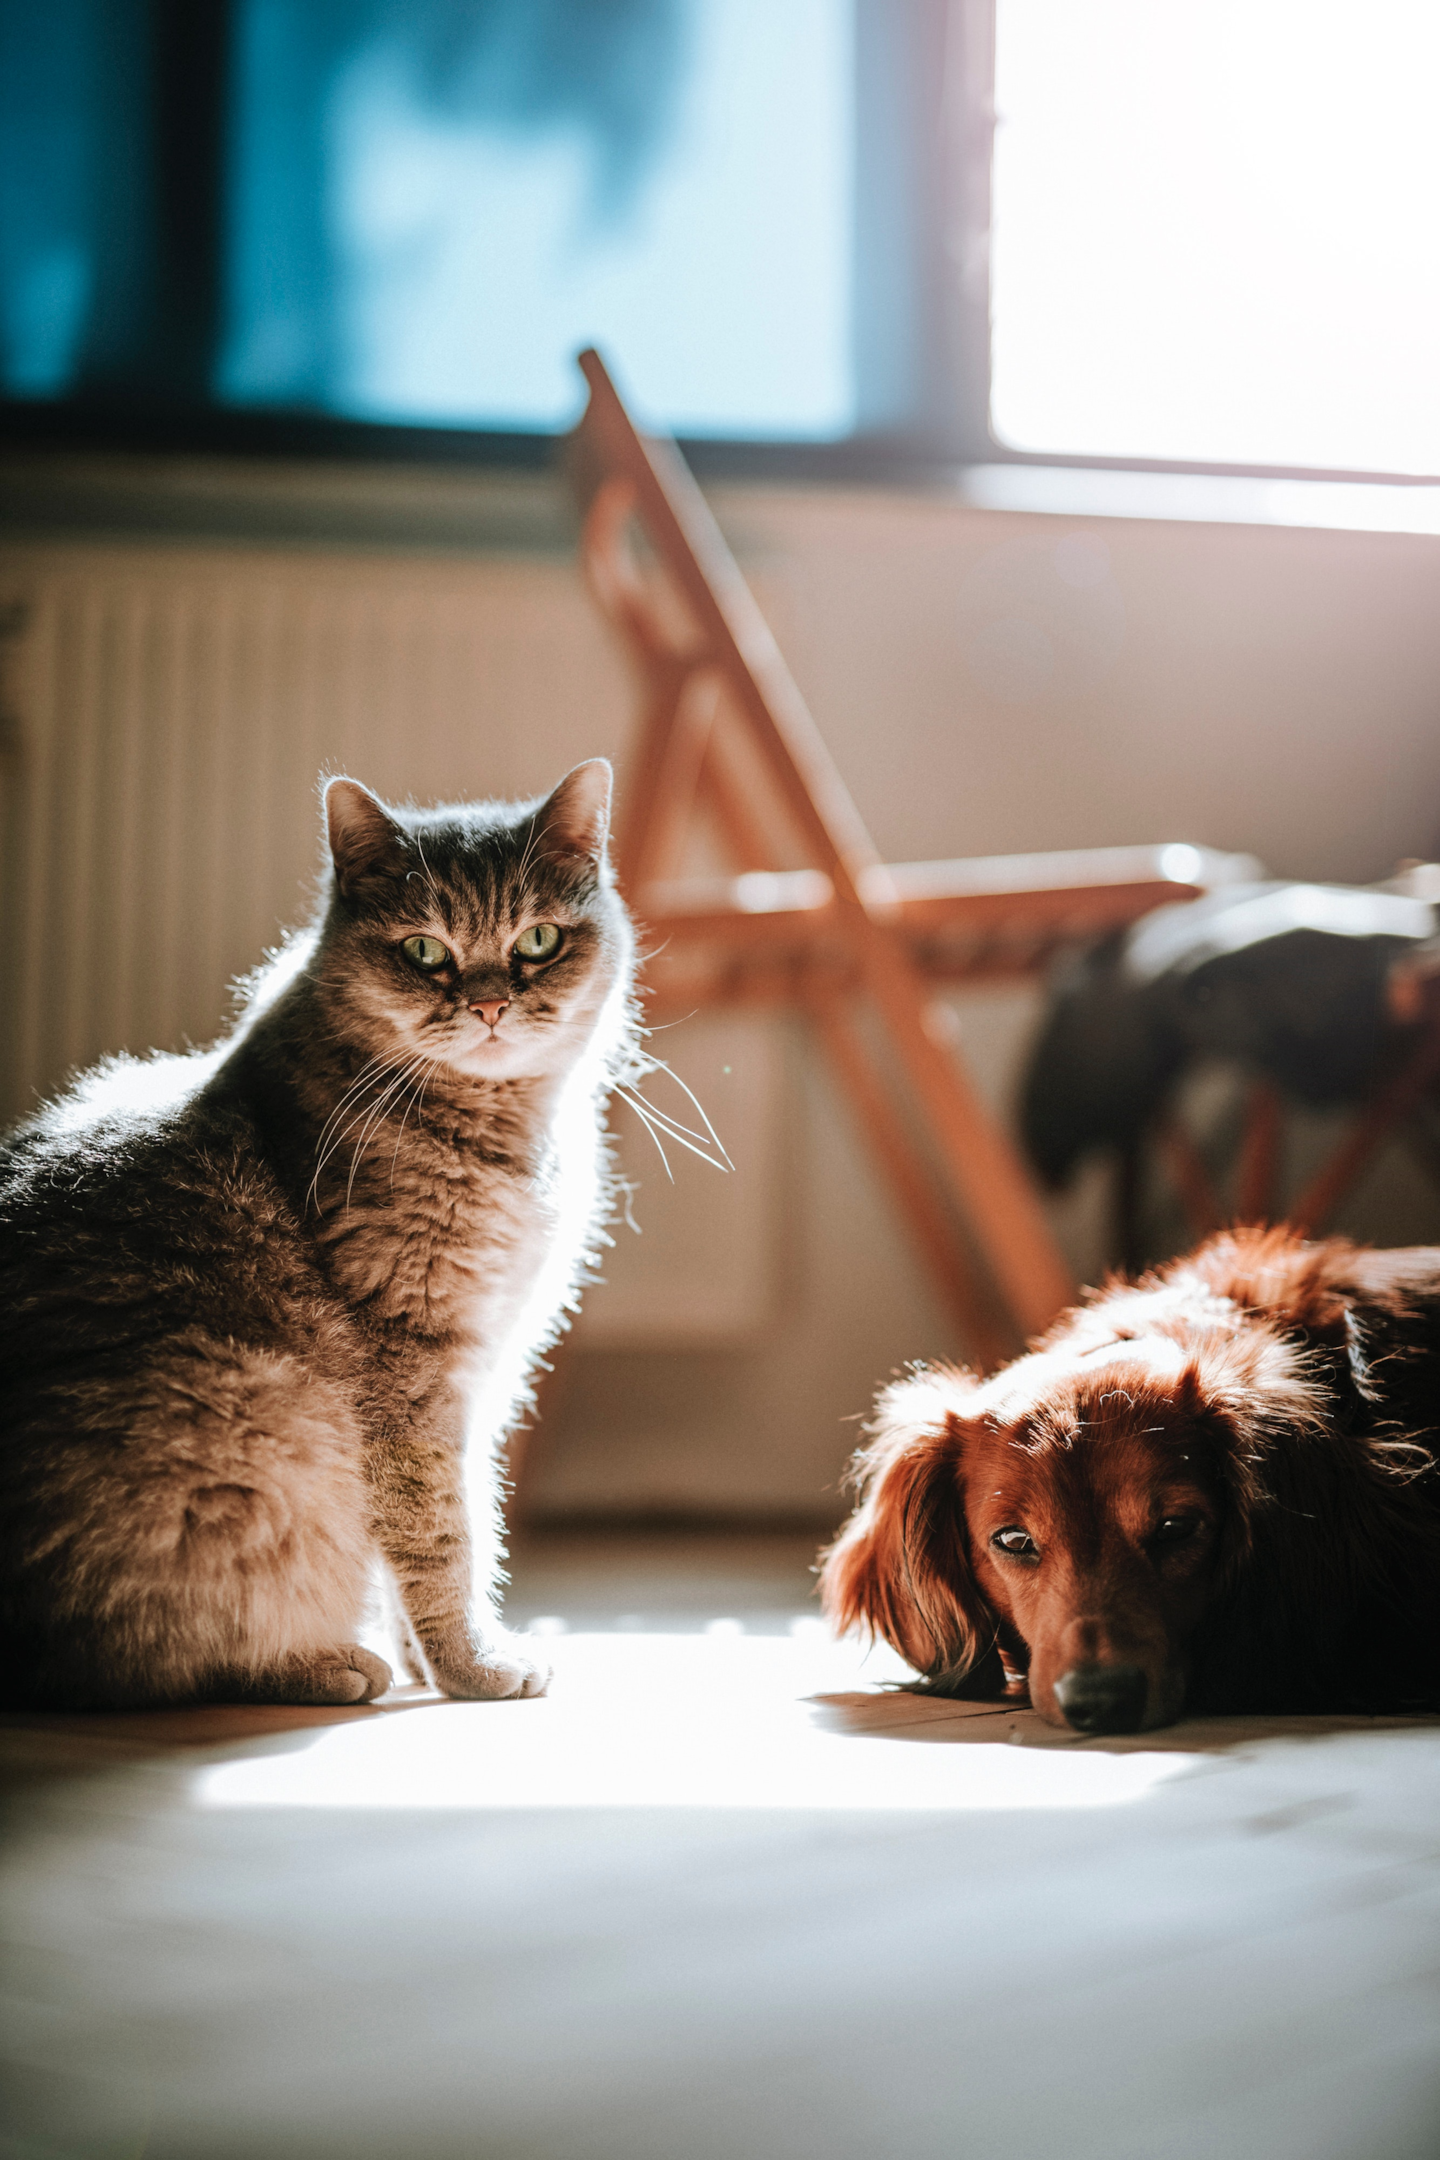 Pet ownership in divorce proceedings can be complicated. Sole or joint ownership may be made concerning the family pet, who is more than just personal property. Pet custody of the family pet is important to matrimonial lawyers.